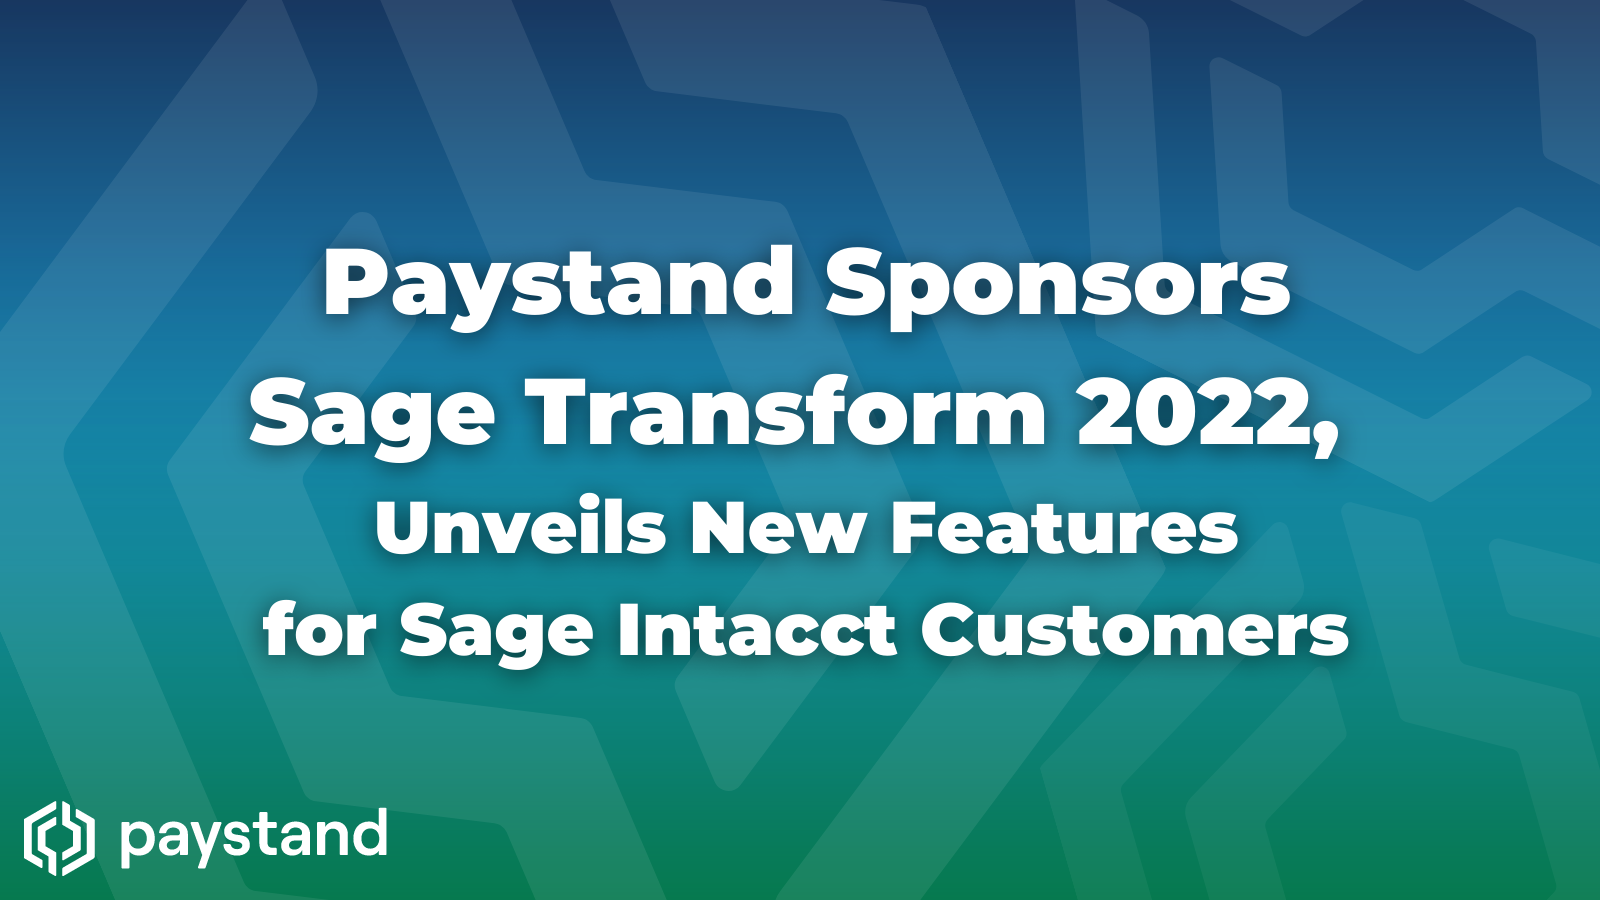 Paystand Sponsors Sage Transform 2022, Unveils New Features for Sage Intacct Customers